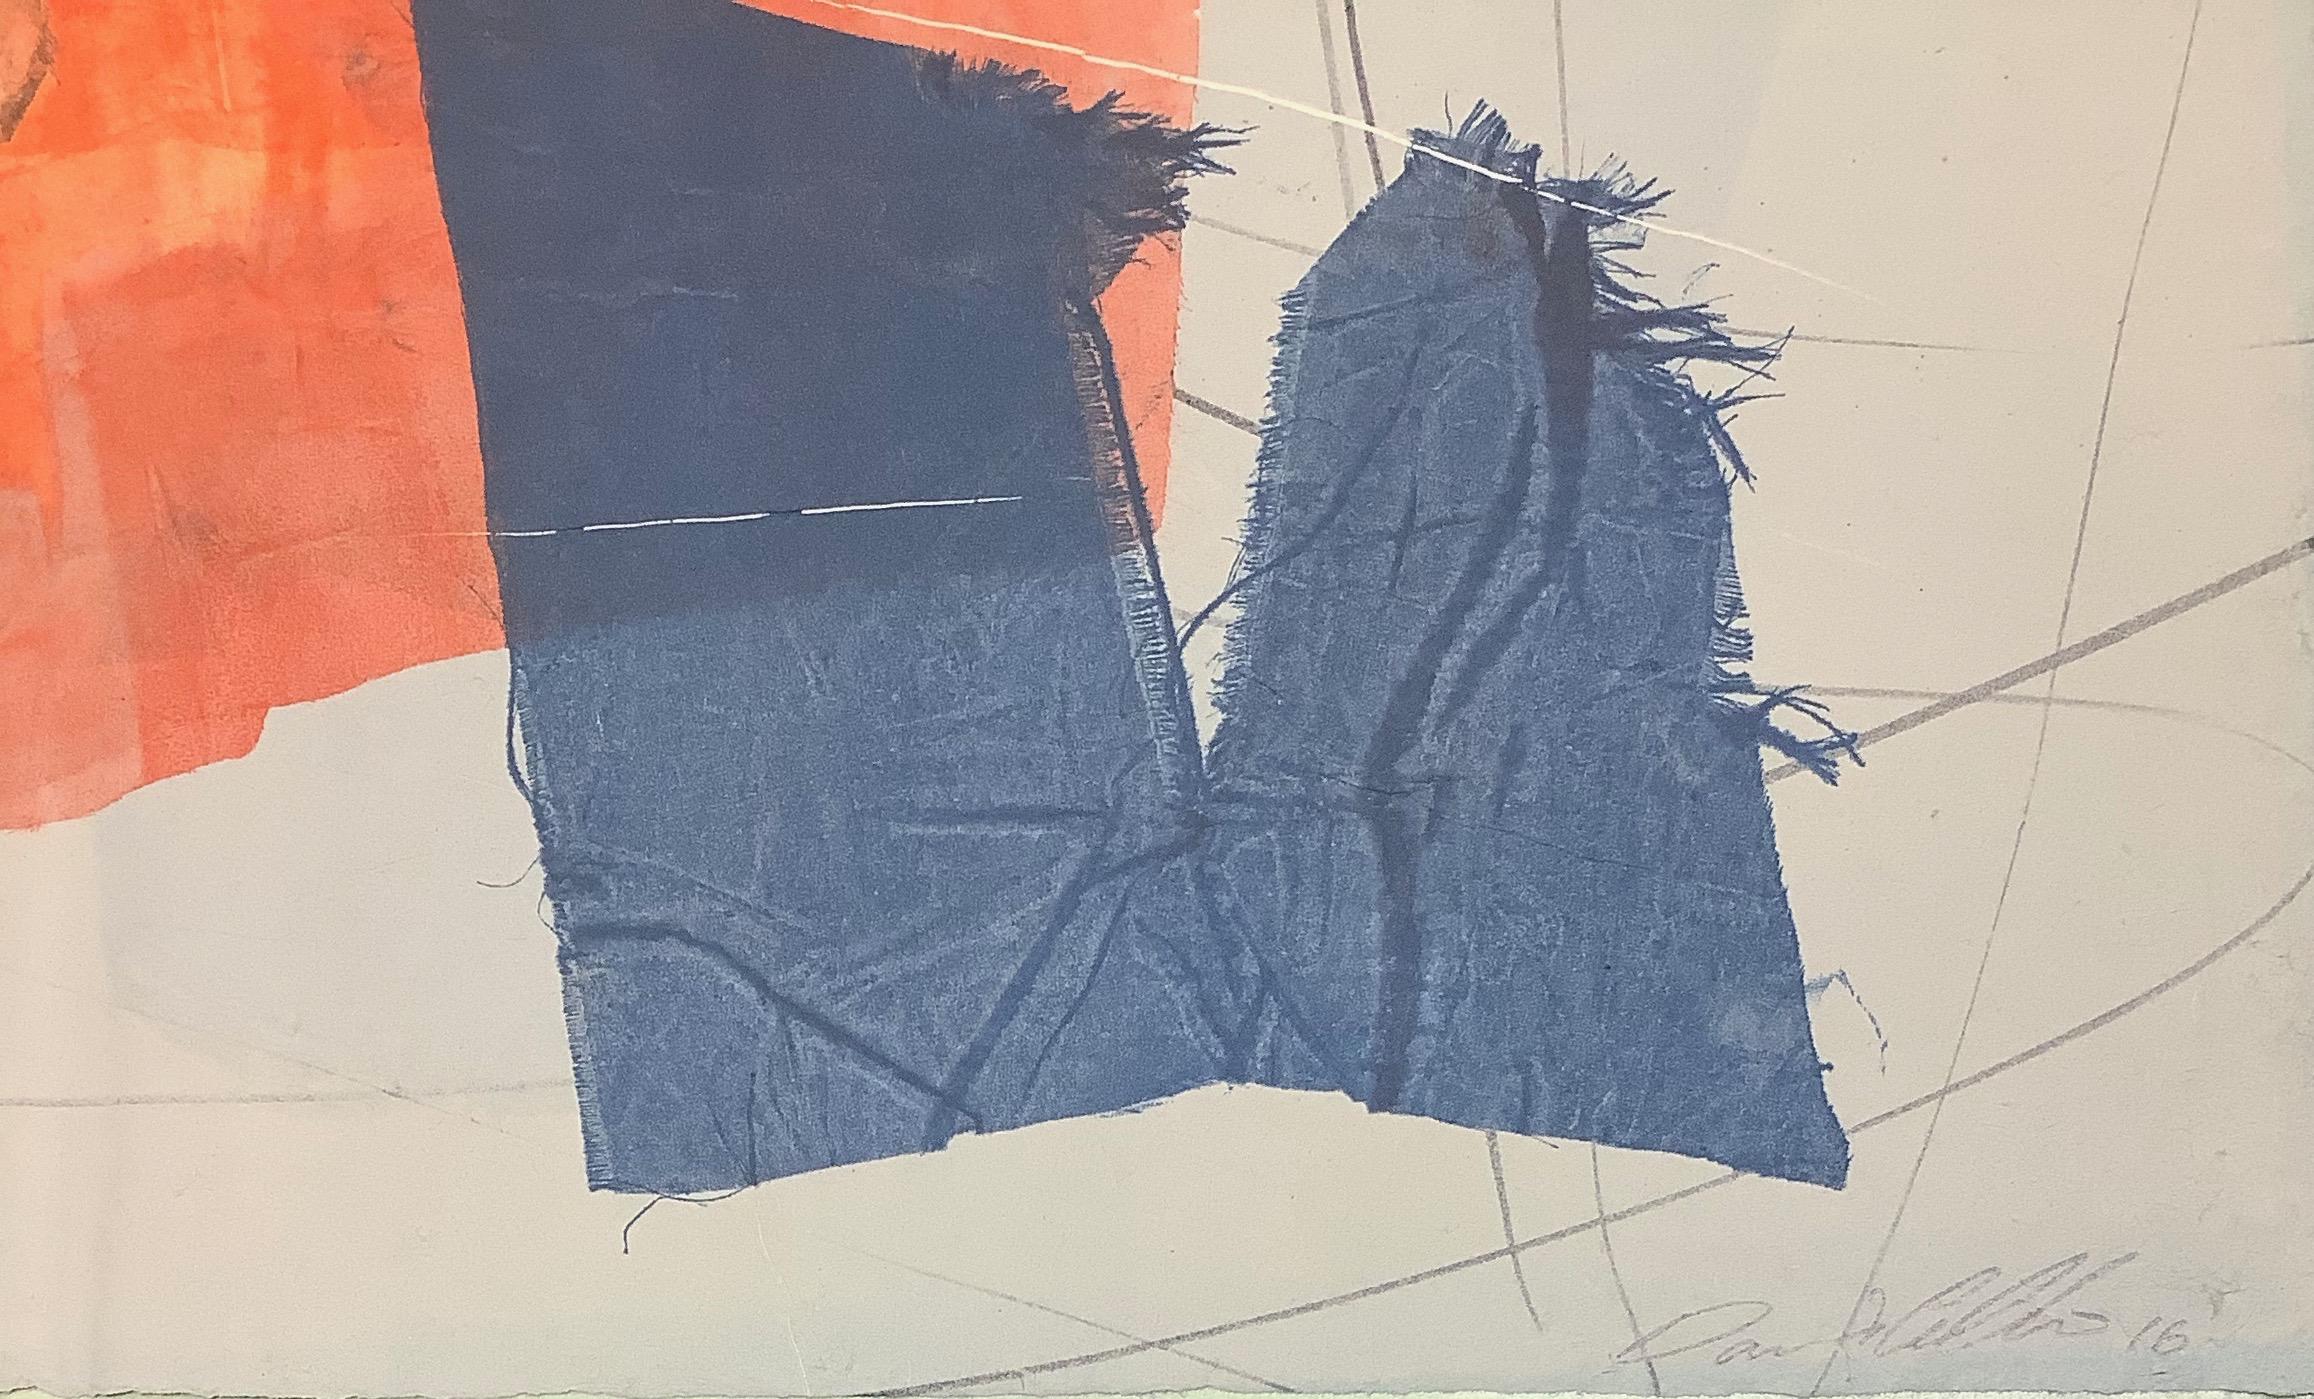 This is a monotype print, a unique print with no other editions. This monotype on delicate Asian paper layers geometric shapes in yellow, coral, red and blue on a soft blue gray background.

Available unframed, please inquire with the gallery for